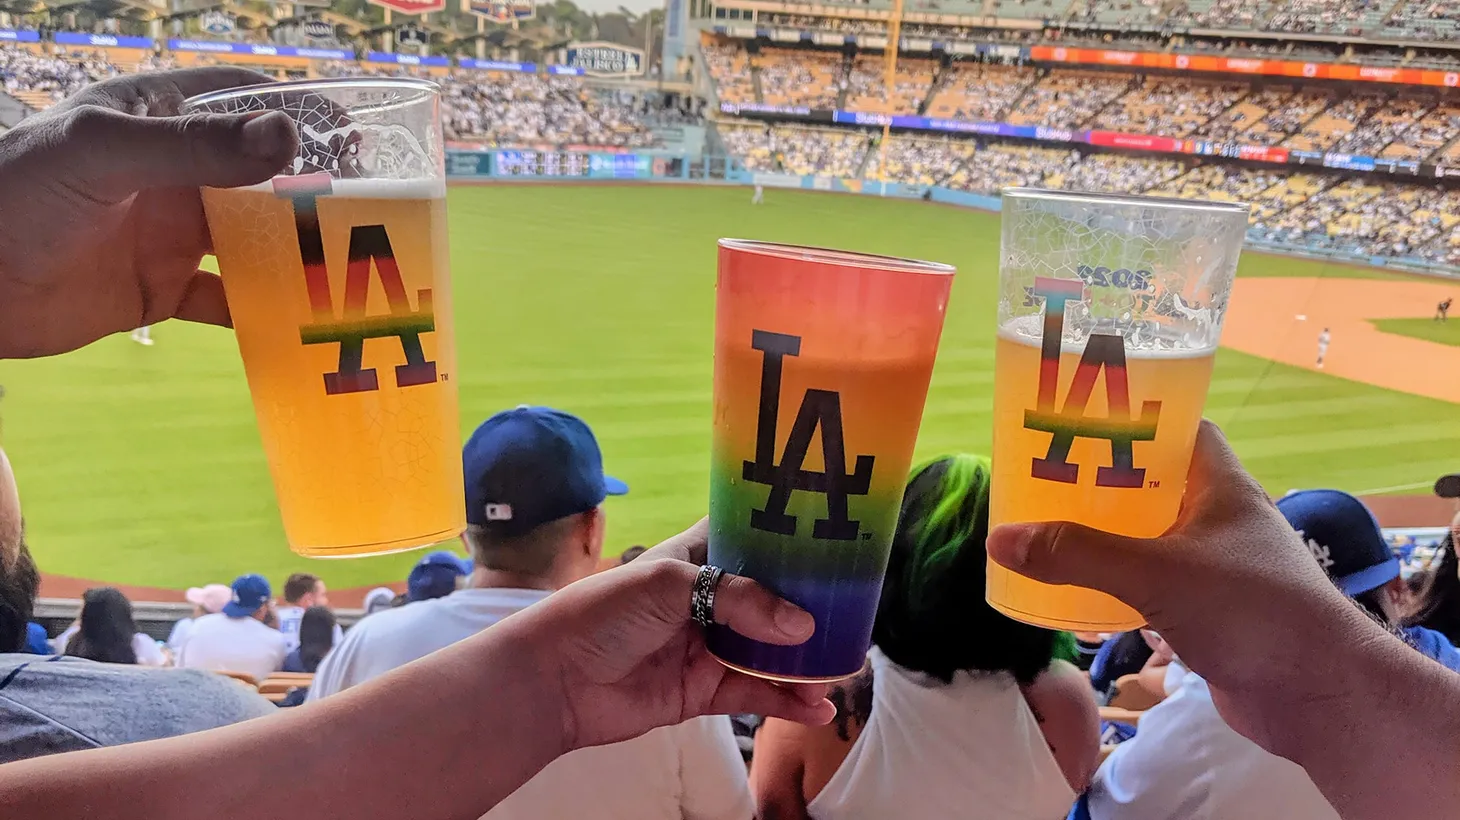 “It's important for us, the queer community, to come and show up to support the Sisters. As an activist, it's actually important to follow as well. I don't think activism means you always need to be the person with the loudspeaker,” says LA Dodgers fan Shih-wei Carrasco-Wu.